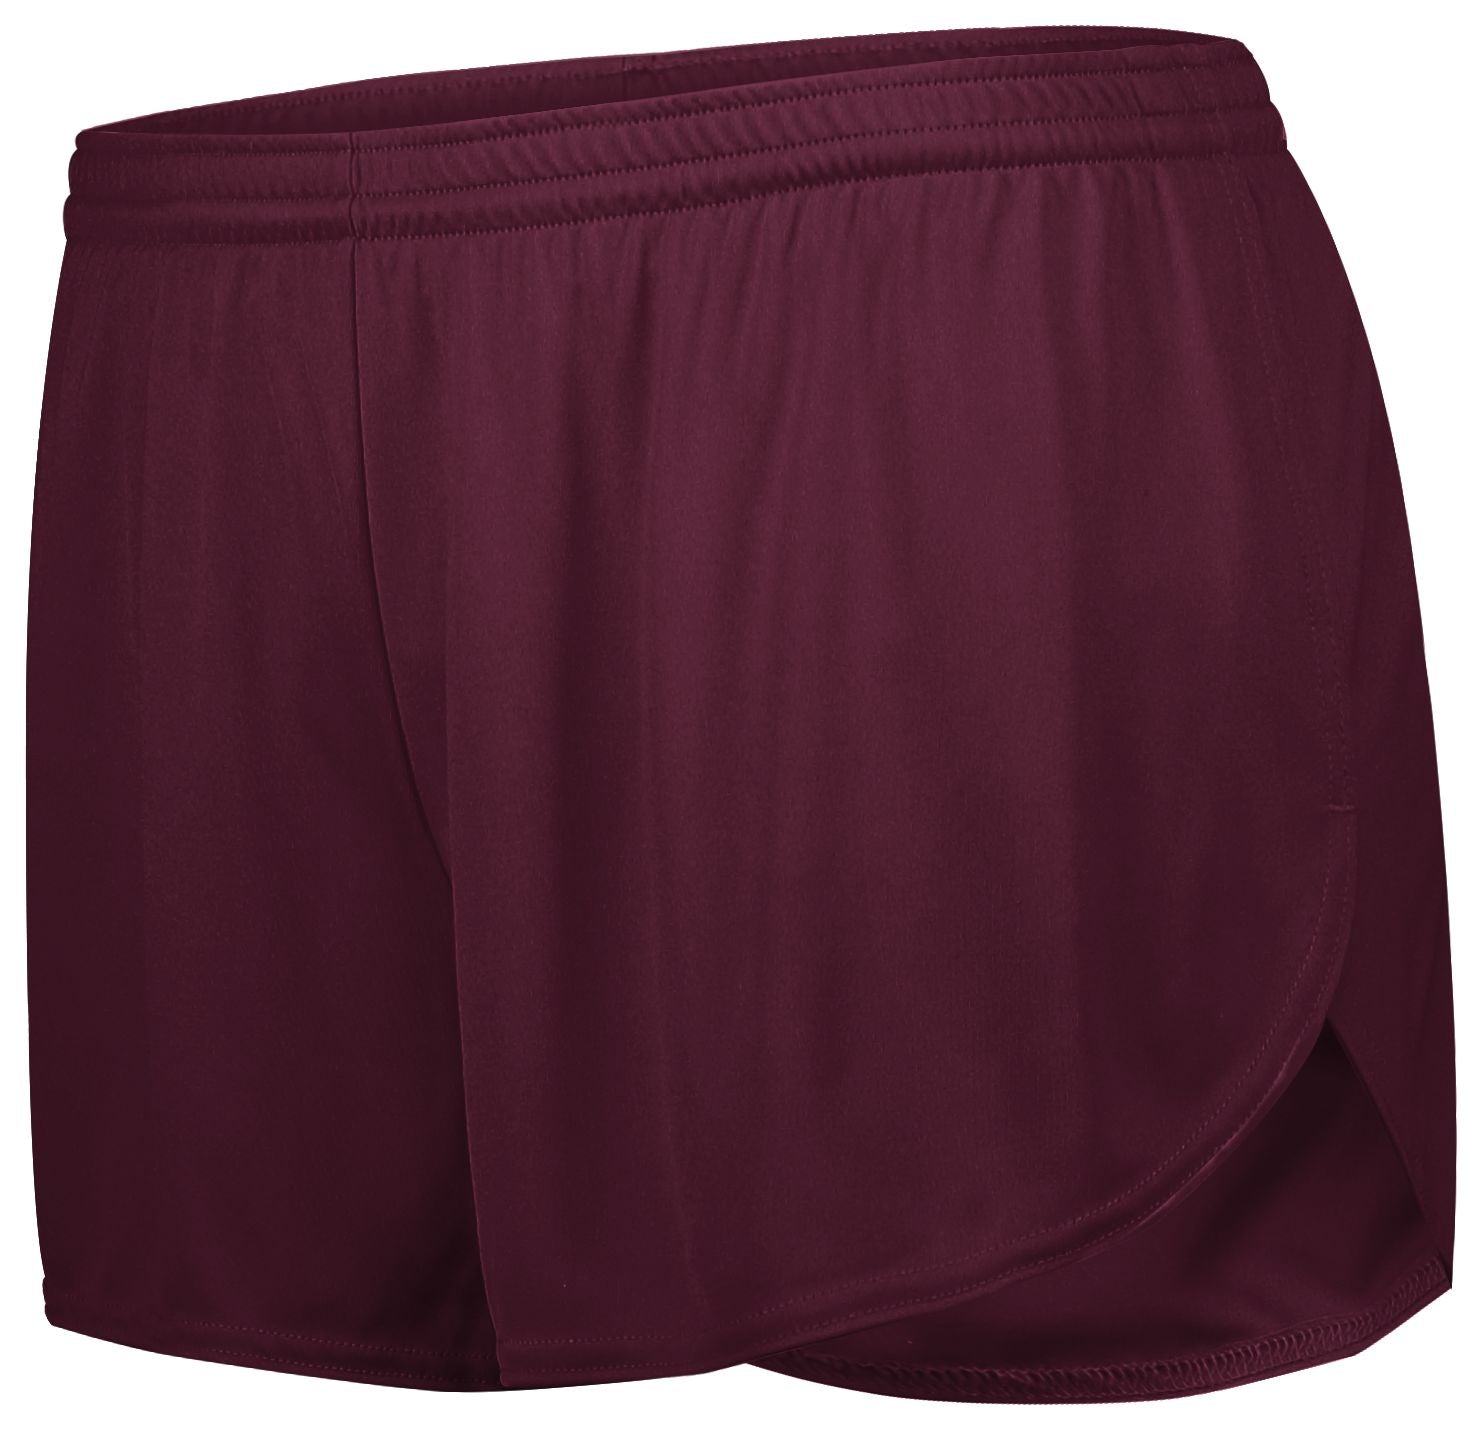 Holloway Ladies Pr Max Track Shorts in Maroon (Hlw)  -Part of the Ladies, Ladies-Shorts, Track-Field, Holloway product lines at KanaleyCreations.com